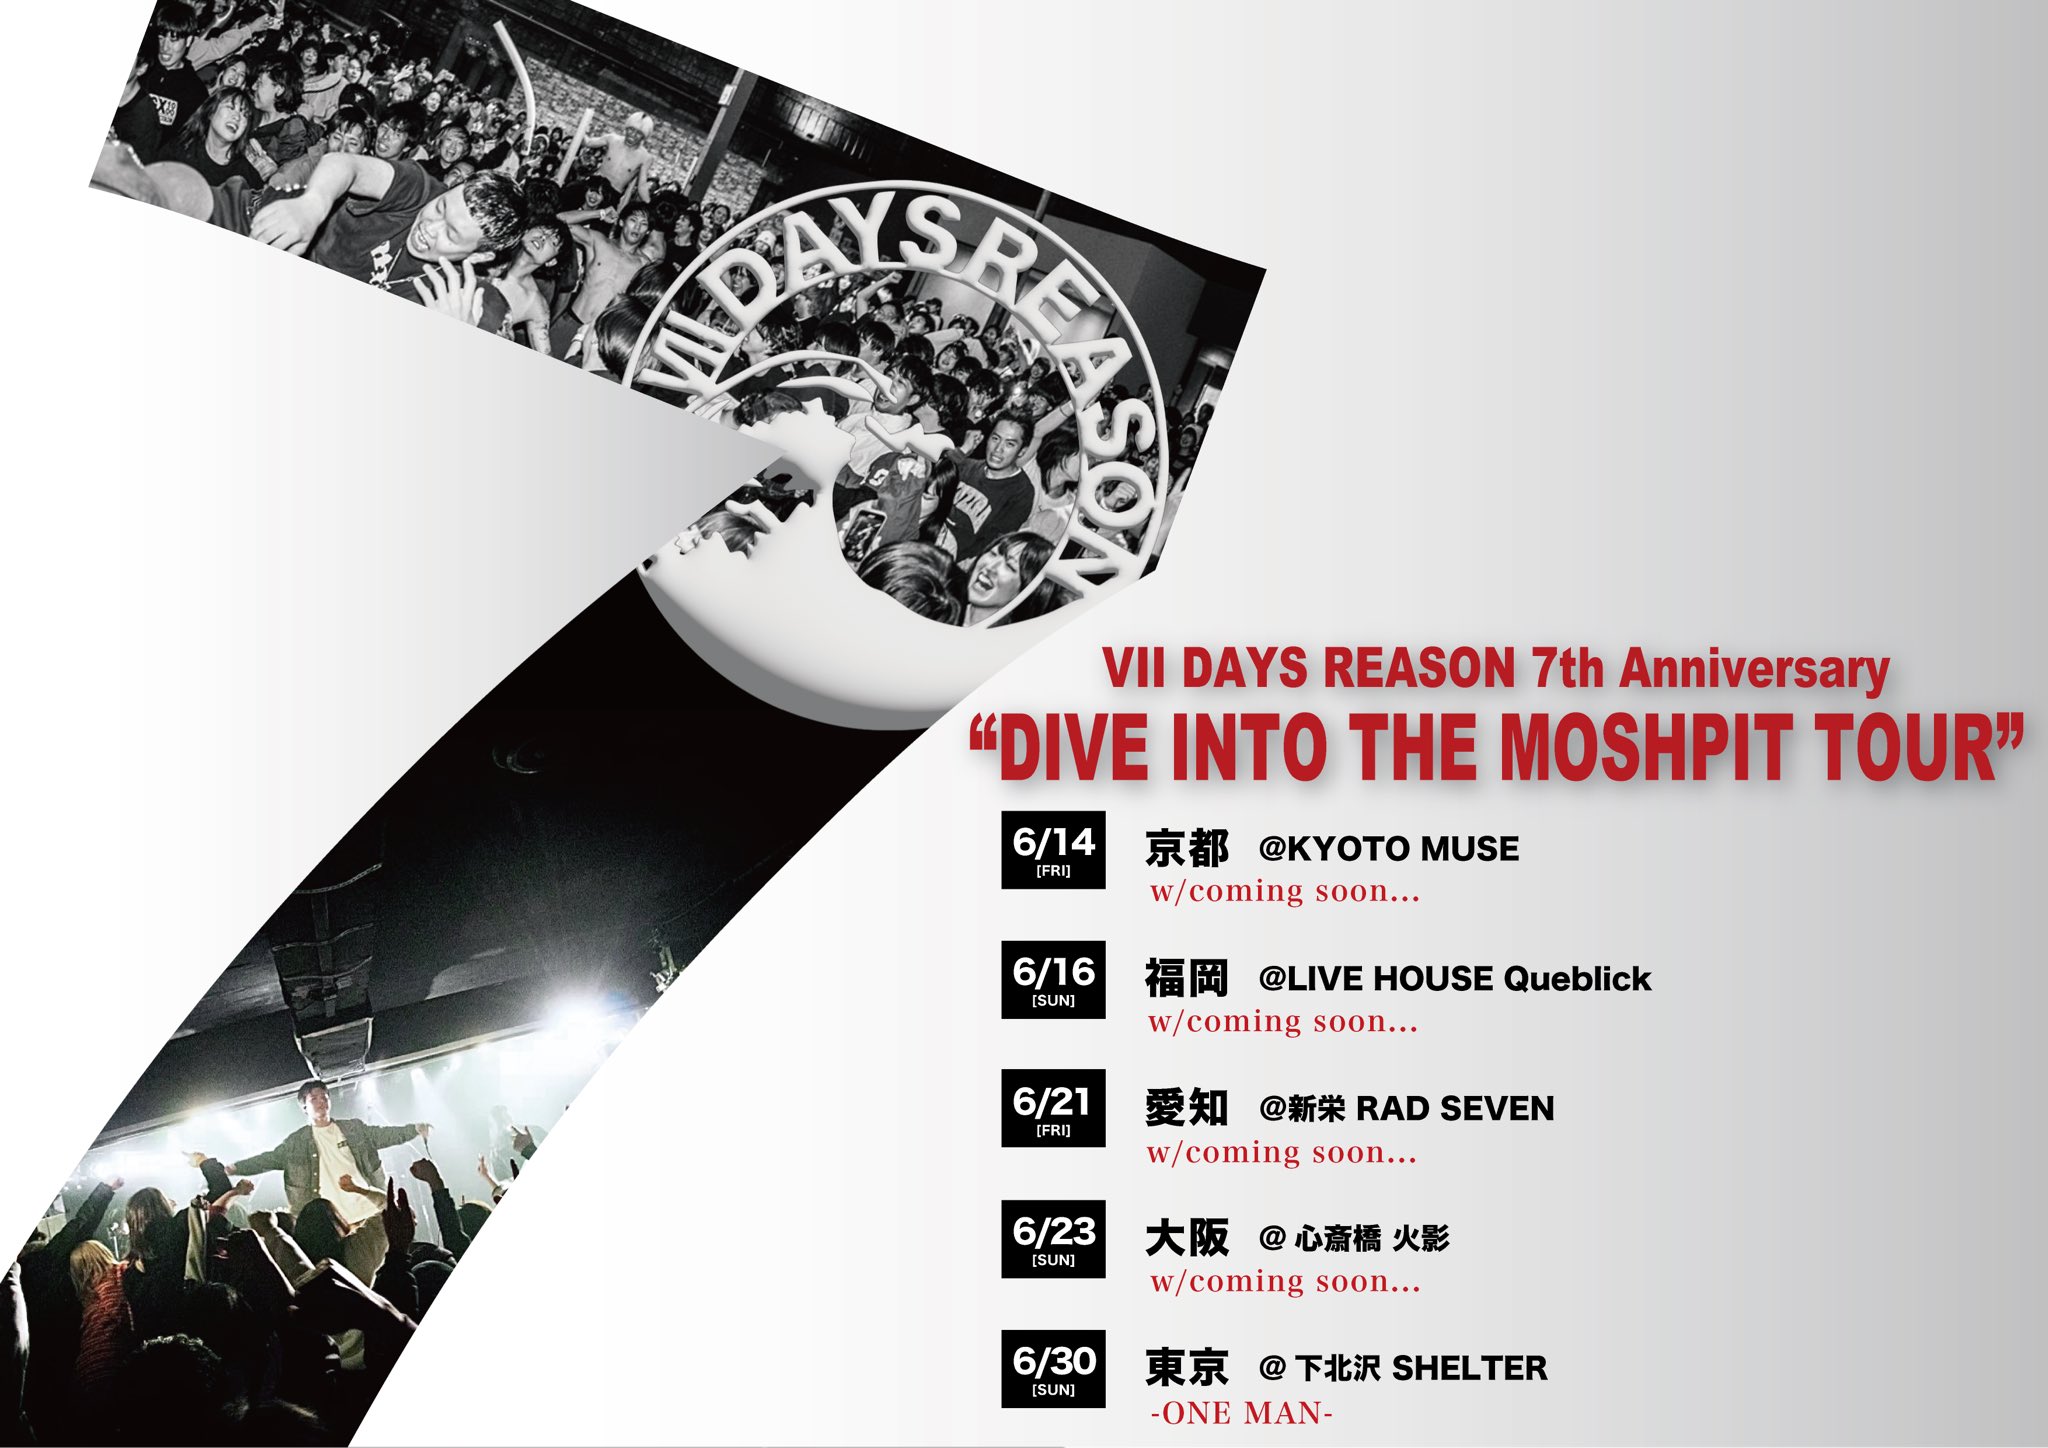 VII DAYS REASON 7th Anniversary "DIVE INTO THE MOSHPIT TOUR"